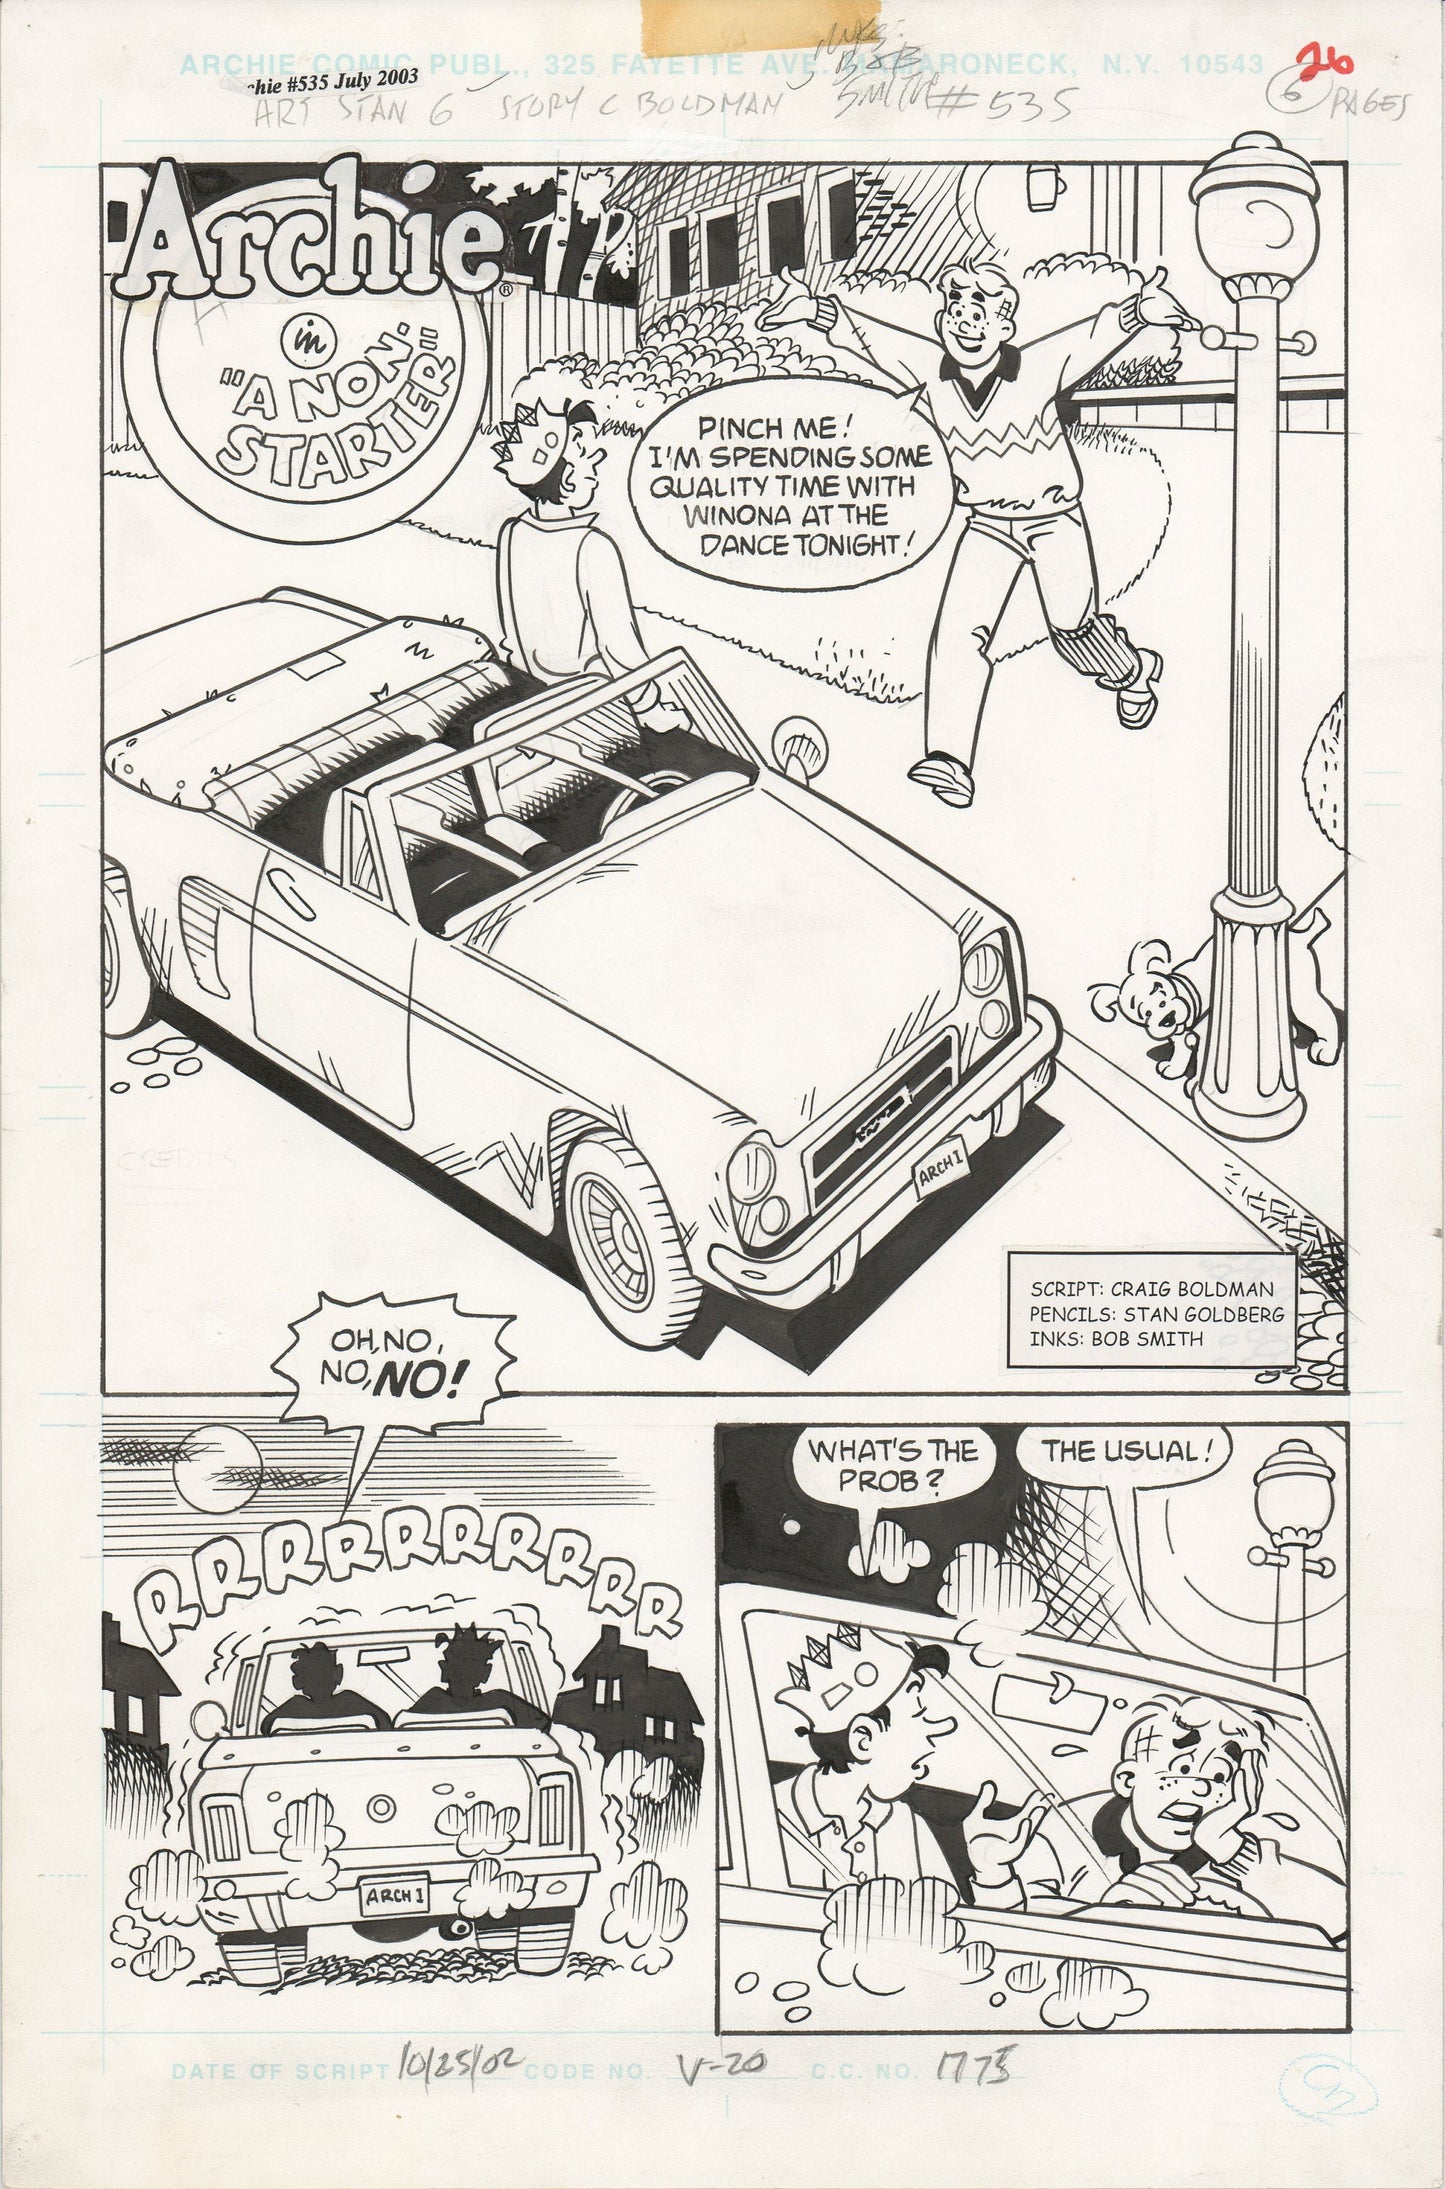 Archie 2003 Hand-inked Original Comic Book Page Art From #535 by Stan Goldberg and Bob Smith p26